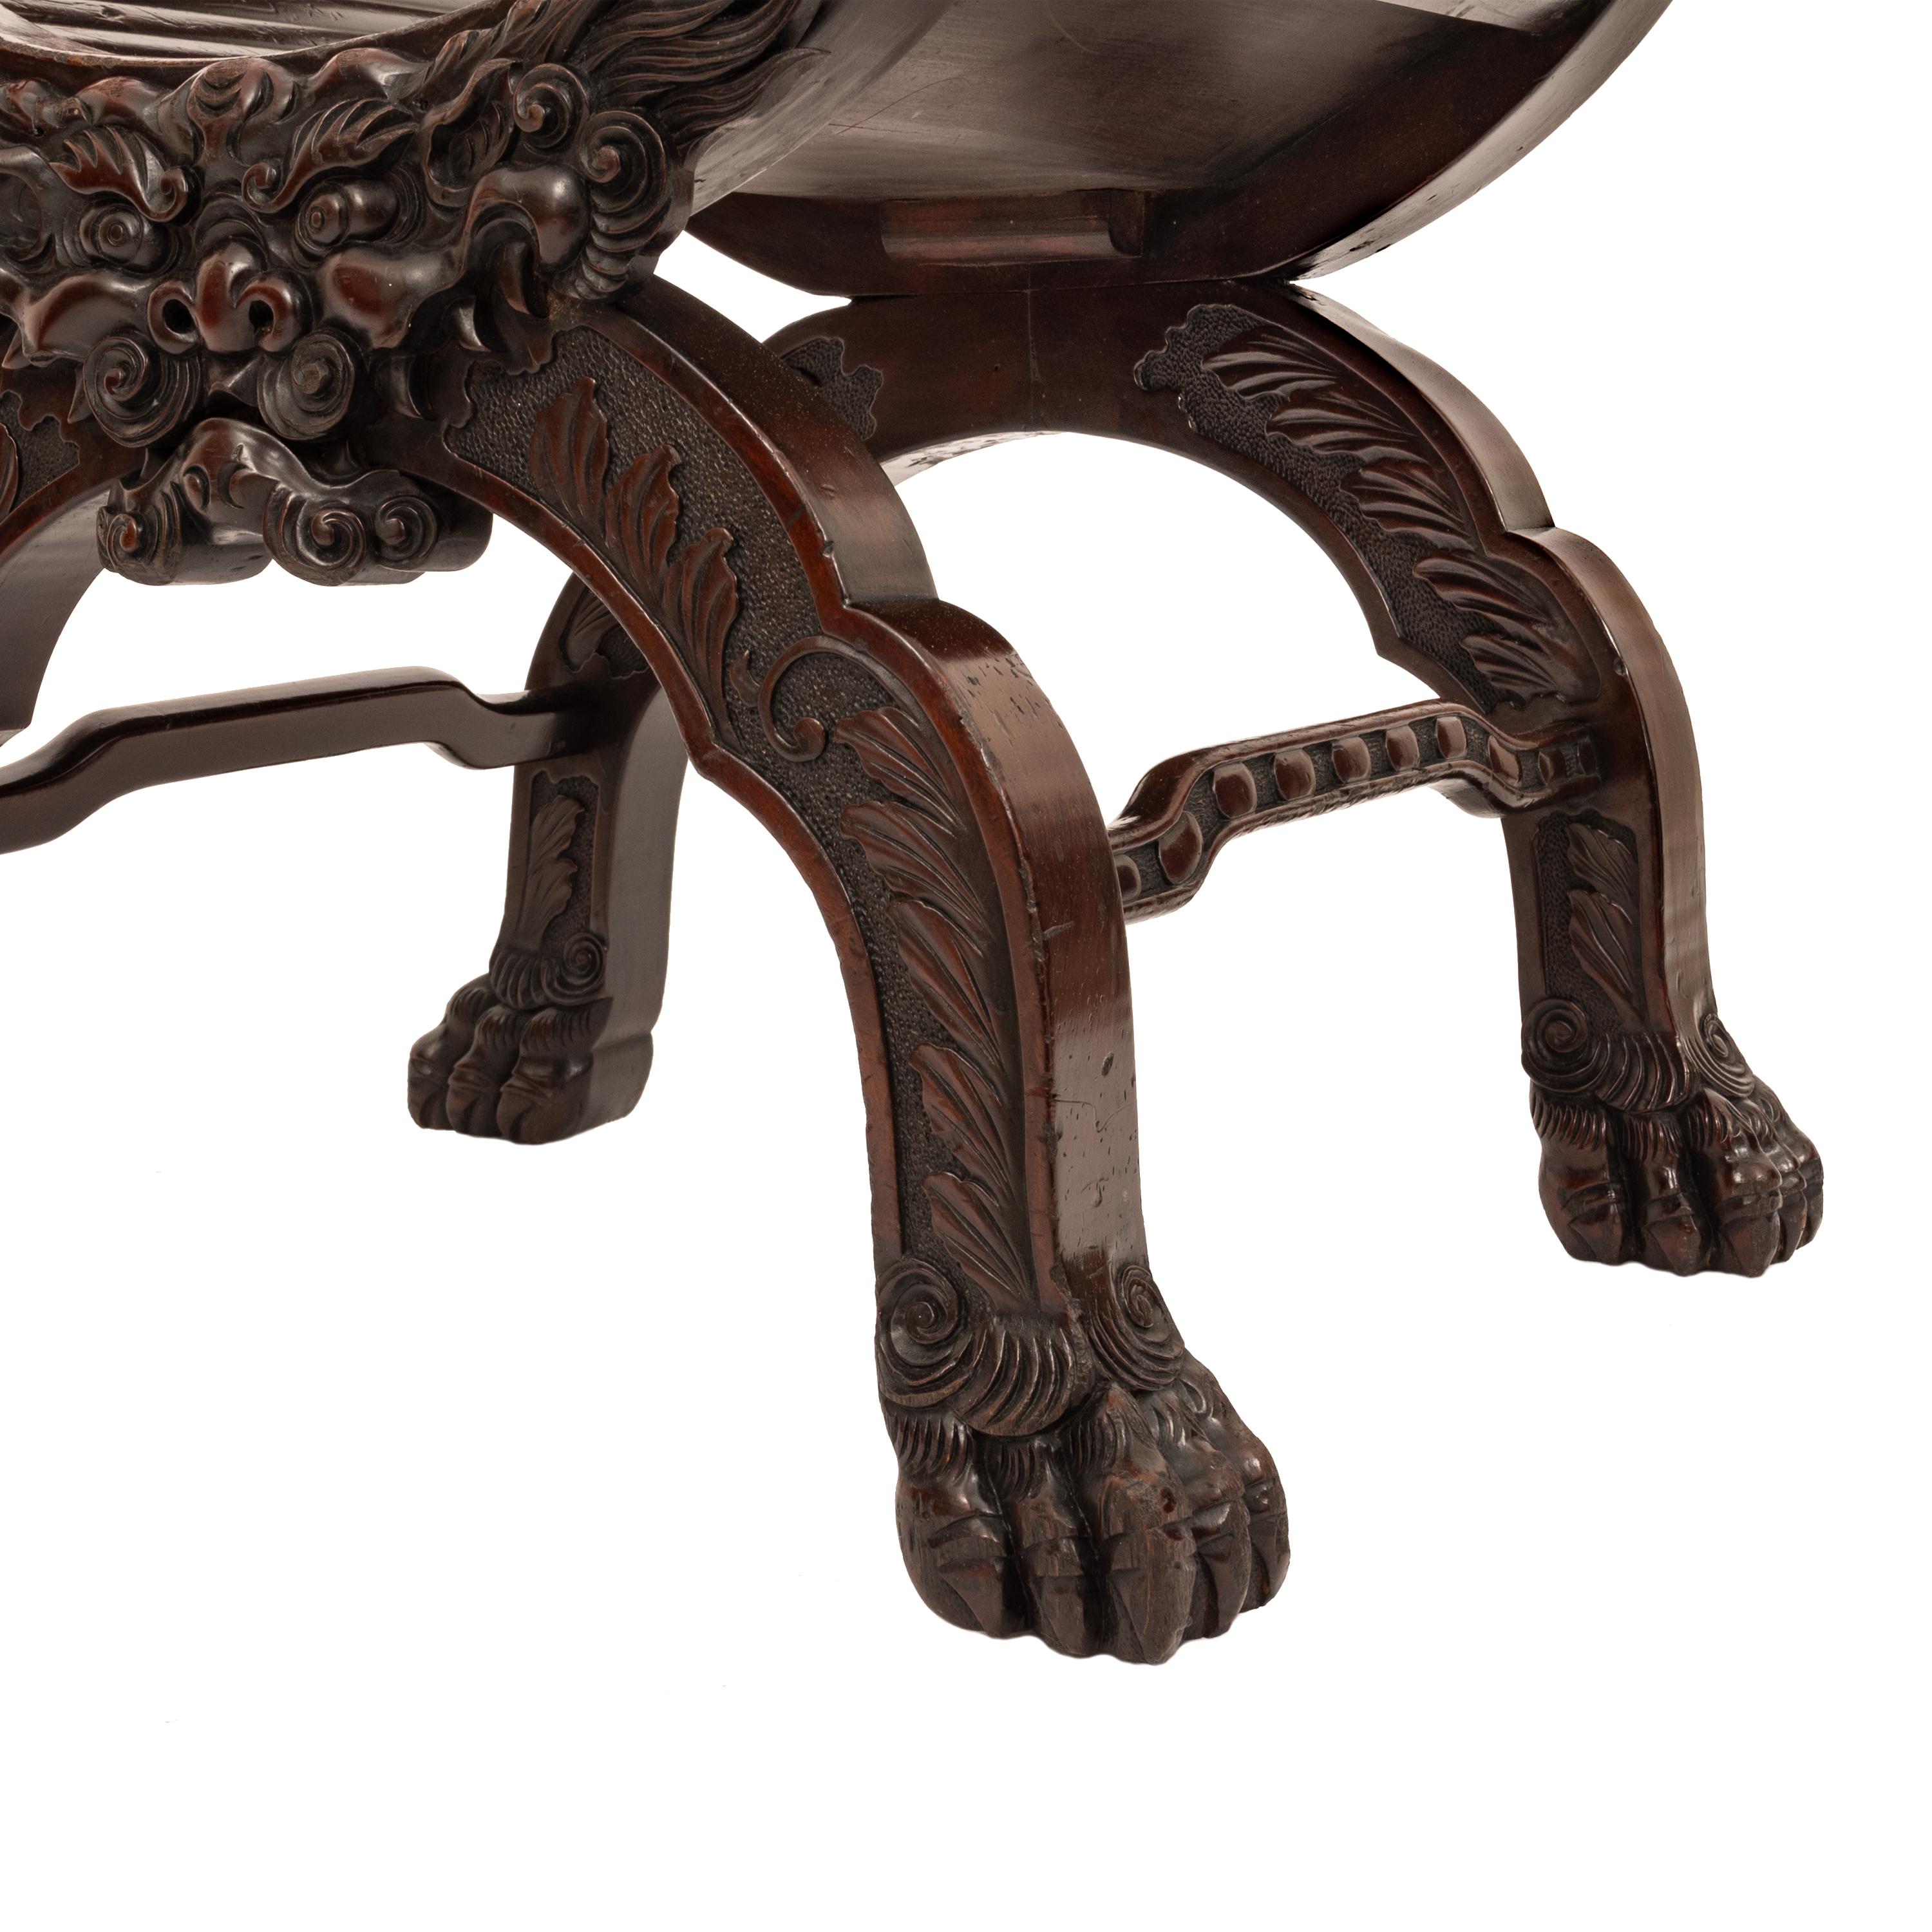 Antique American Robert Mitchell Carved Chinoiserie Savonarola Dragon Chair 1900 For Sale 2